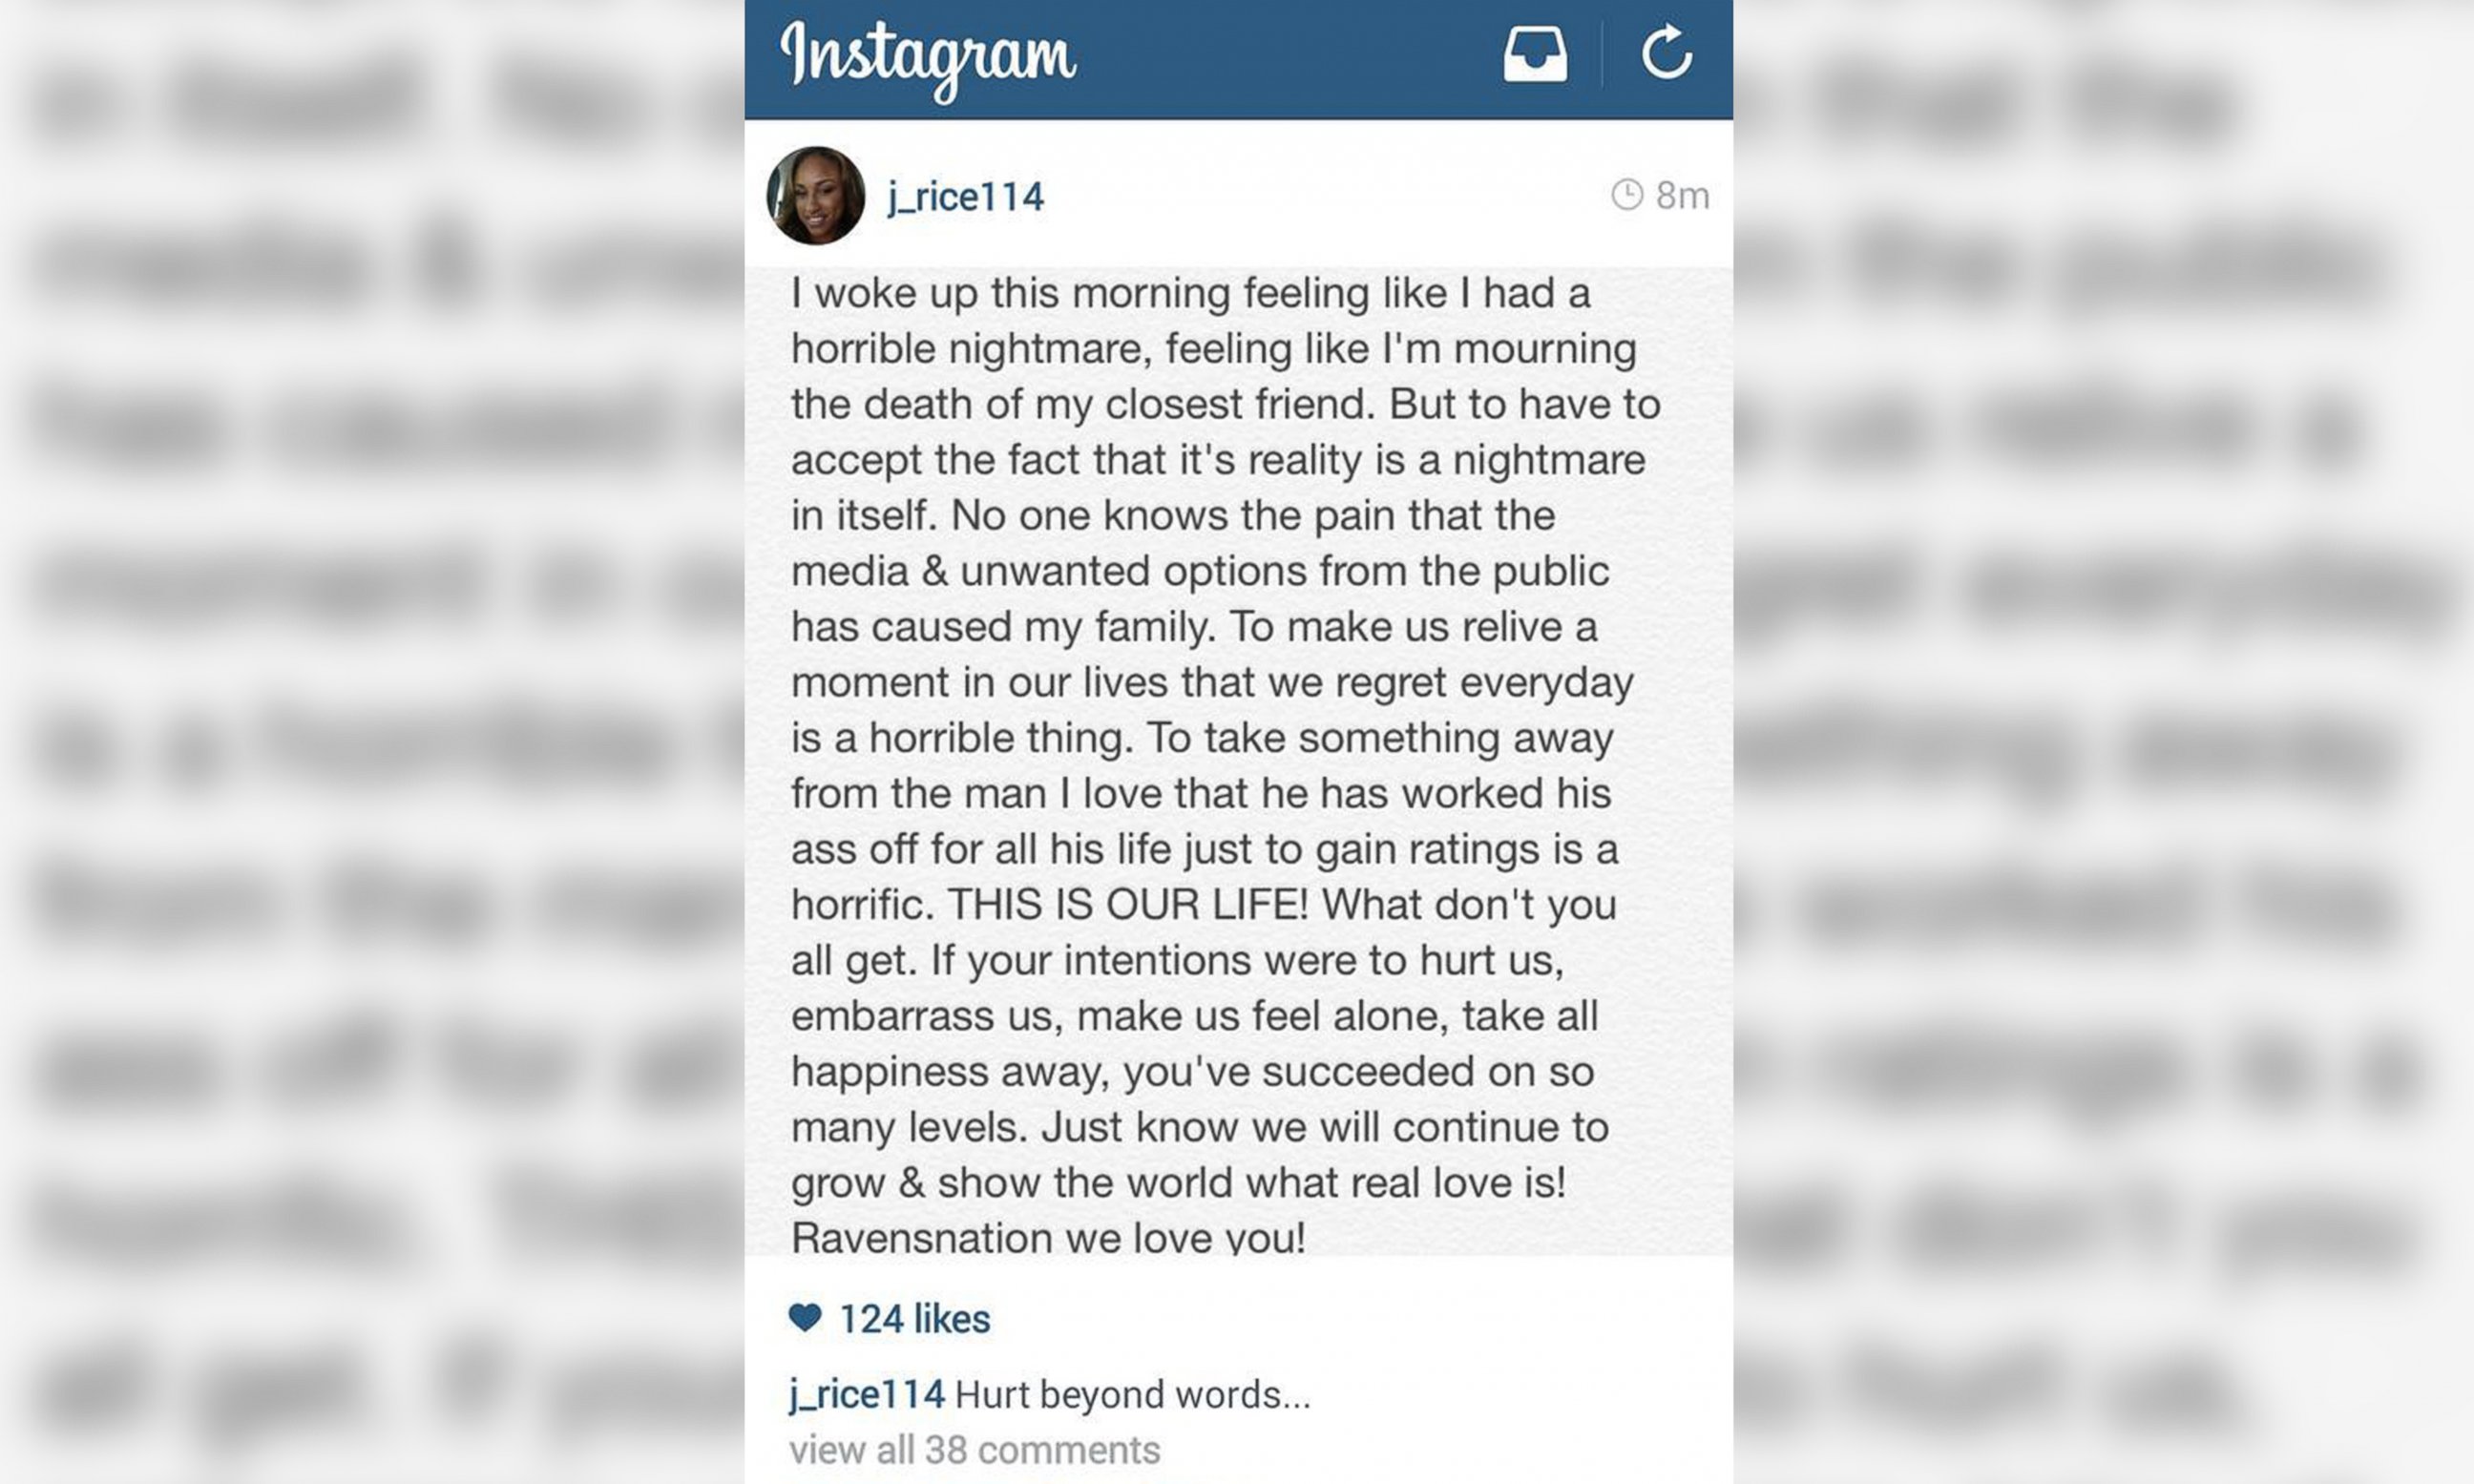 PHOTO: A statement posted to Janay Rice's Instagram account on Sept. 9, 2014 says, "To make us relive a moment in our lives that we regret every day is a horrible thing."